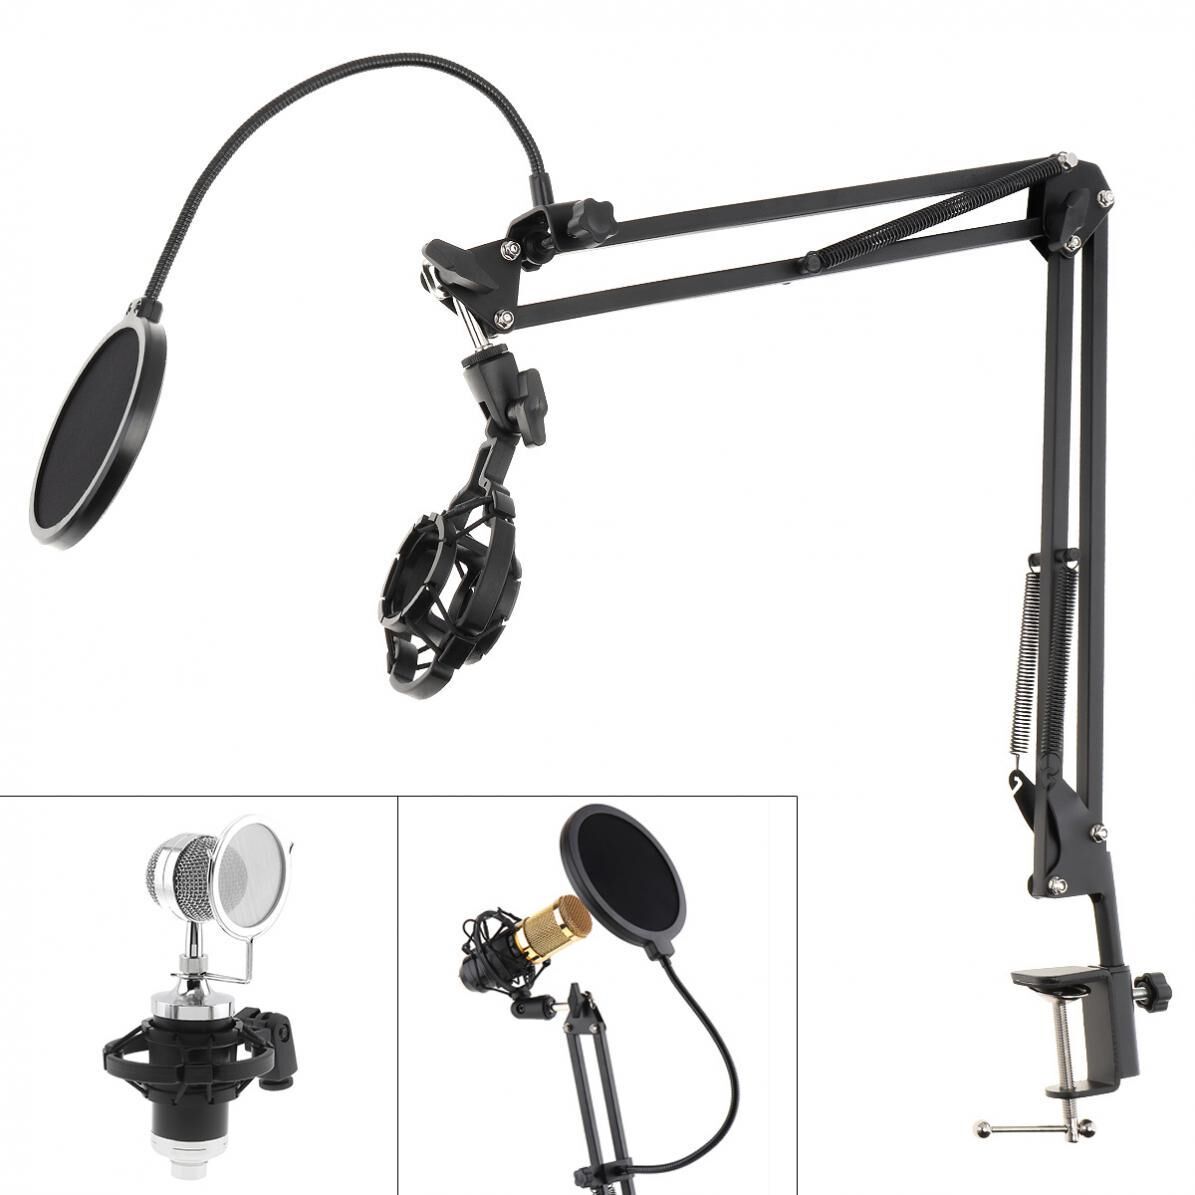 DiGiYes Multi-function Microphone Holder Bracket and Table Clip for Live Broadcast Studio Speaking Recording